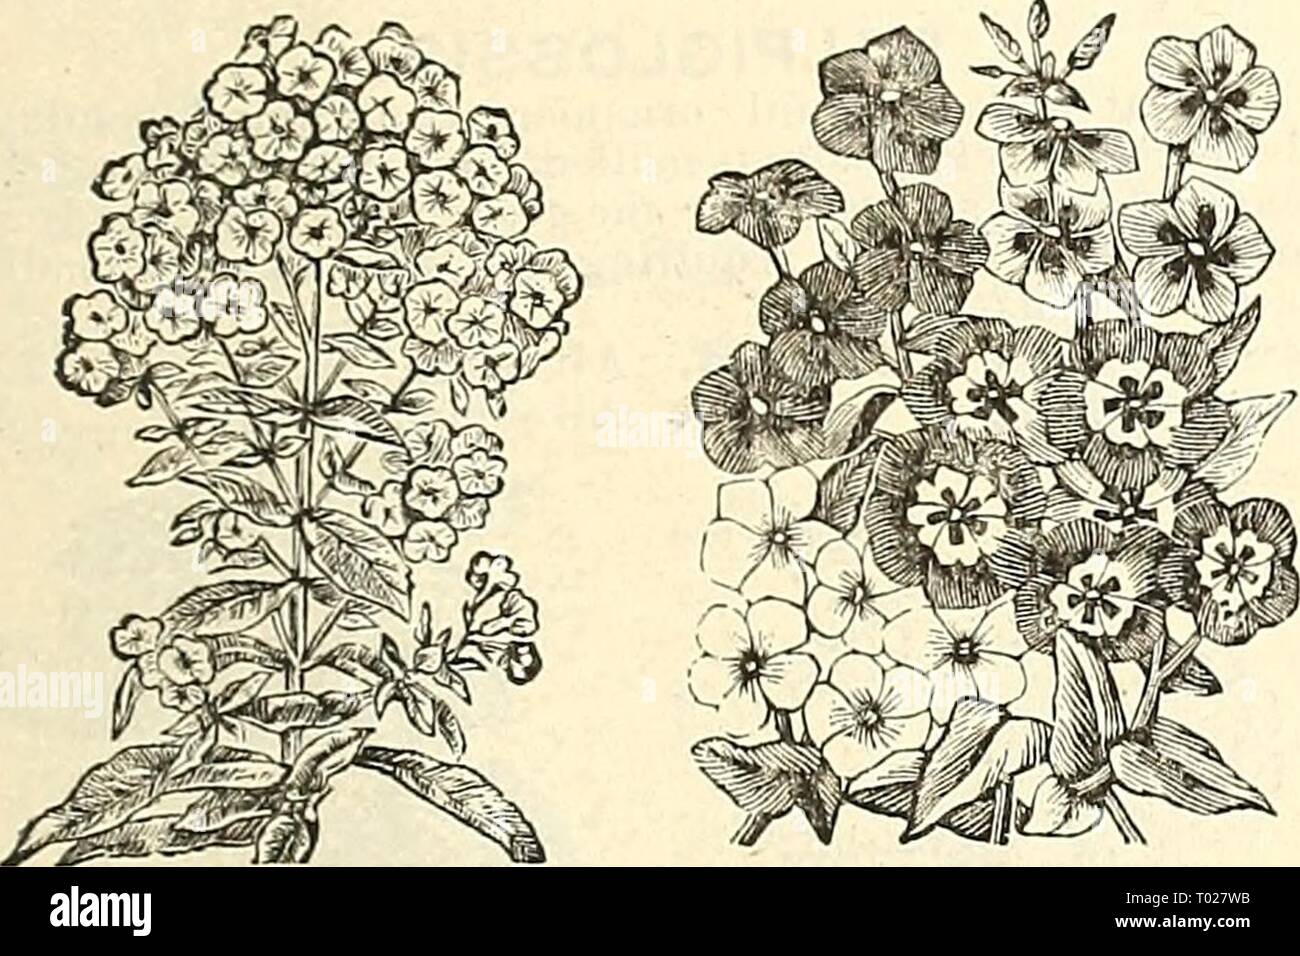 Dreer's garden calendar : 1886 . dreersgardencale1886henr Year: 1886  FOR THE FLOWER CARD EX. 57 PHLOX—(Continued. 6328 P. Peach Blossom. Larije flowers of a delicate salmon tint 10 6326— Iladowitzi. Rose, striped white 10 6330 — Mixed. All colors. Per oz., iJl.OO 5 PHLOX DRUMMONDI GRANDlFLORA. An improvement on the old varieties in stronger, more comjiact growth, and larger flowers, with white cen- tres, admirably relieved bv a (hirk violet eye; li feet. 6331 P. Alba'Pura. Pure white 10 633-1— Carminea Alba Oculata. Rosy carmine, white eye 10 6332— Coccinea. Rich brilliant scarlet 10 6335 — E Stock Photo